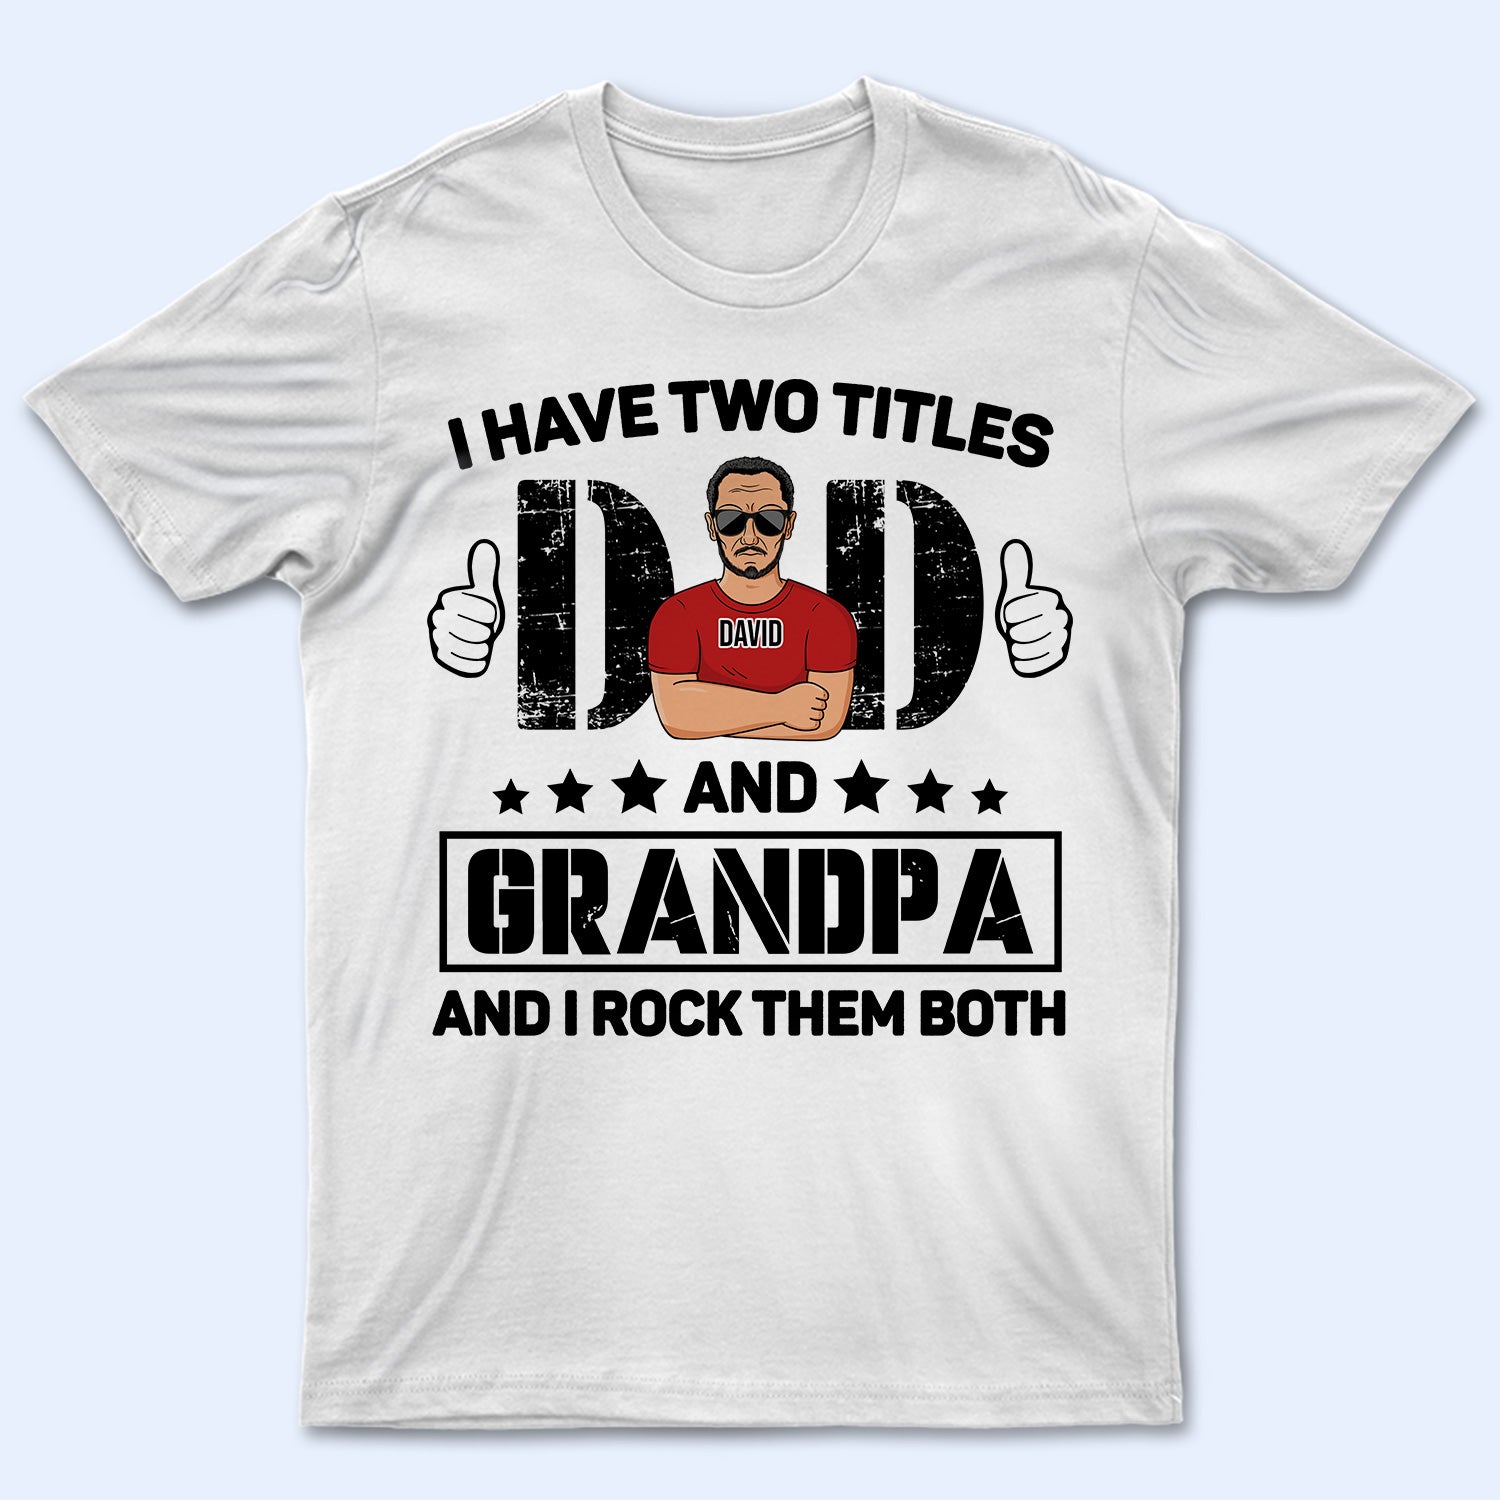 Two Titles Dad Grandpa Rock Both - Birthday, Loving Gift For Daddy, Father, Grandfather, Husband, Men - Personalized Custom T Shirt